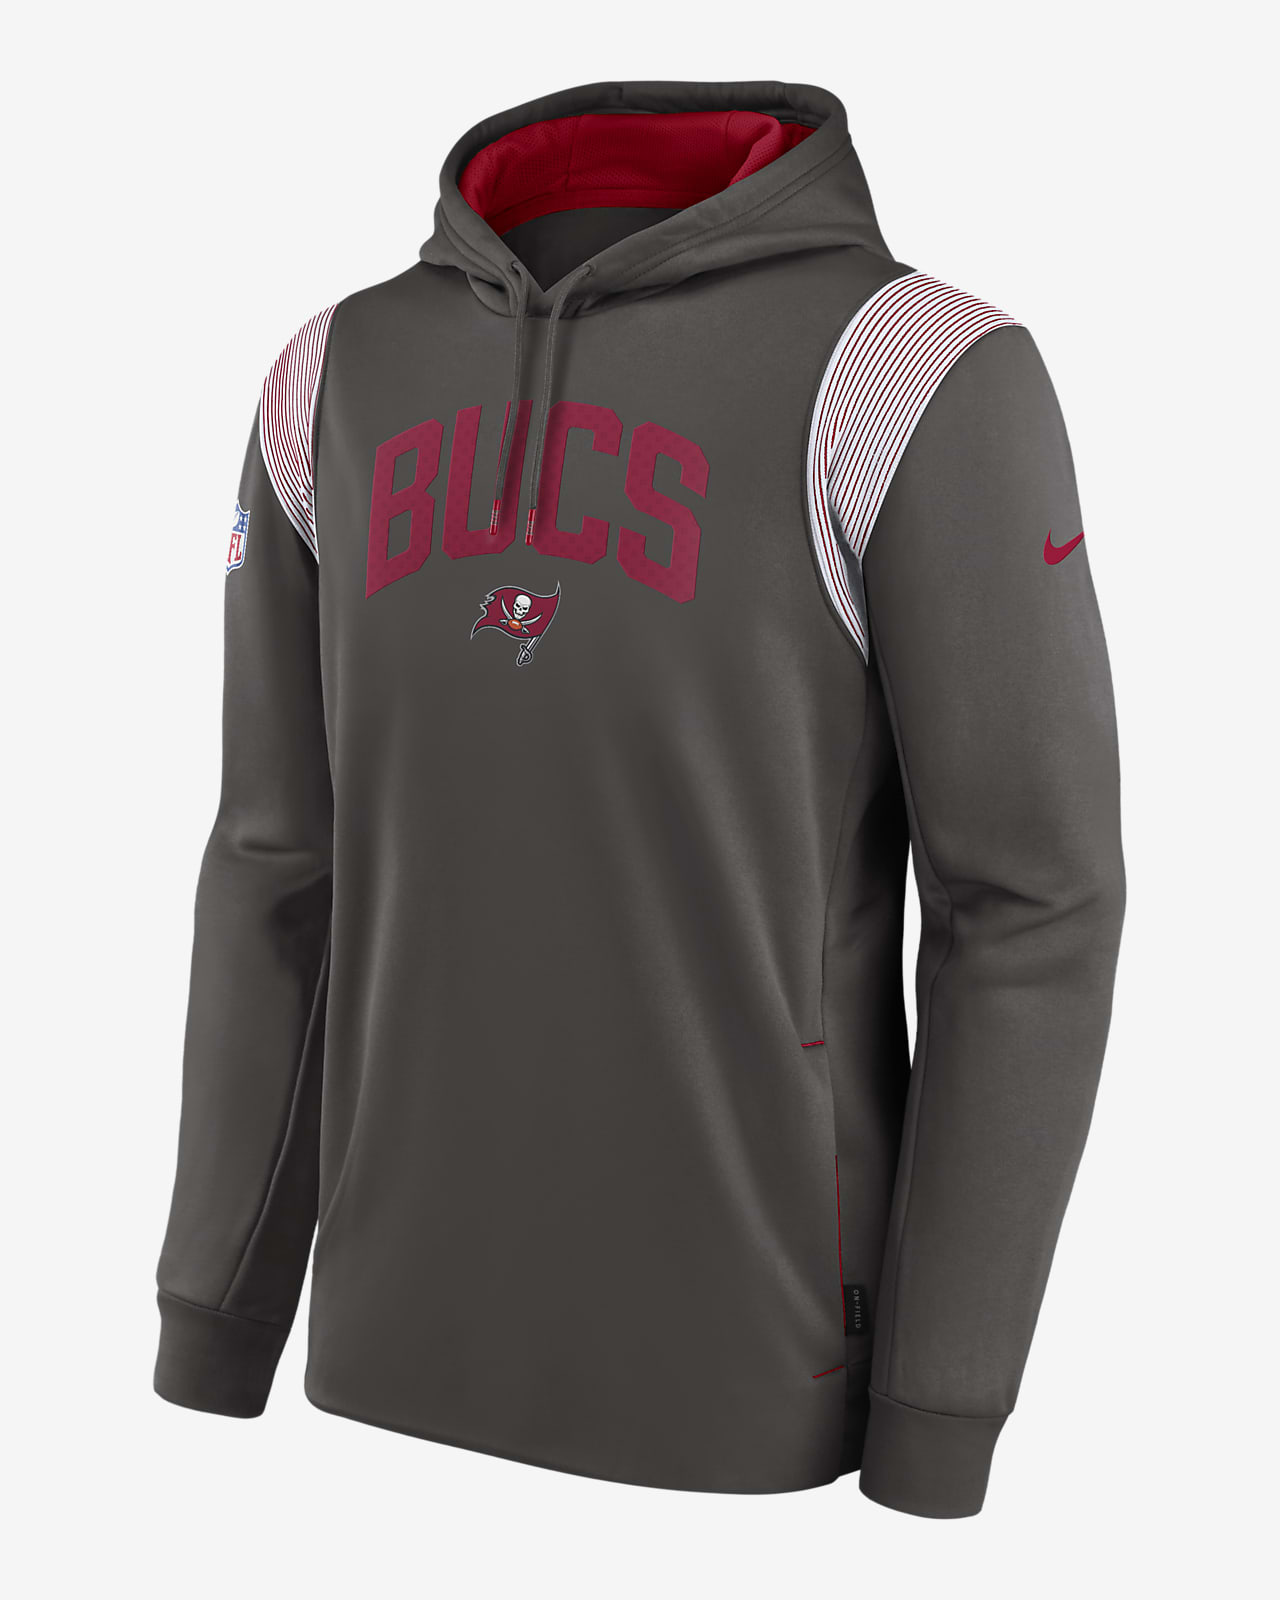 Nike Youth Chicago Bulls Spotlight Pullover Fleece Hoodie - Red - L Each